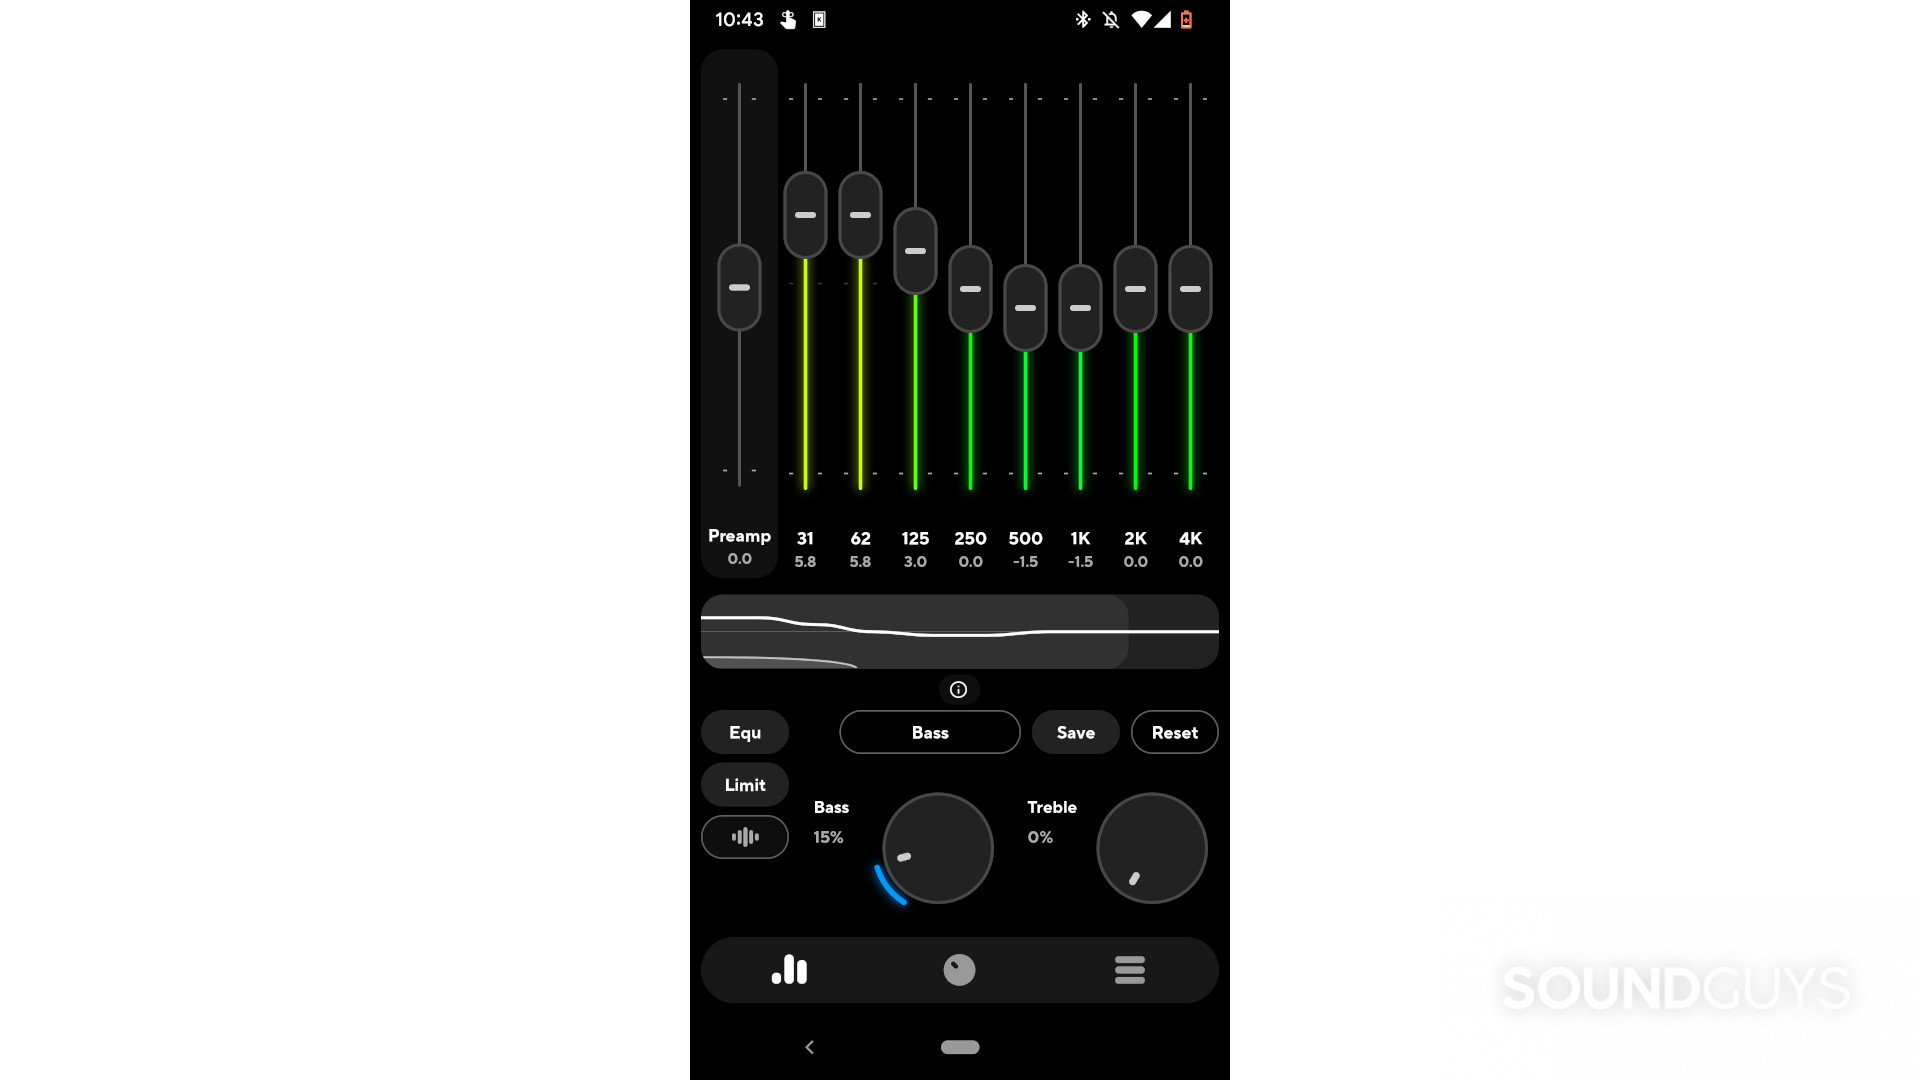 A screenshot of the Powermap Equalizer app showing adjustable sliders and dials. The sliders are green and yellow in color.